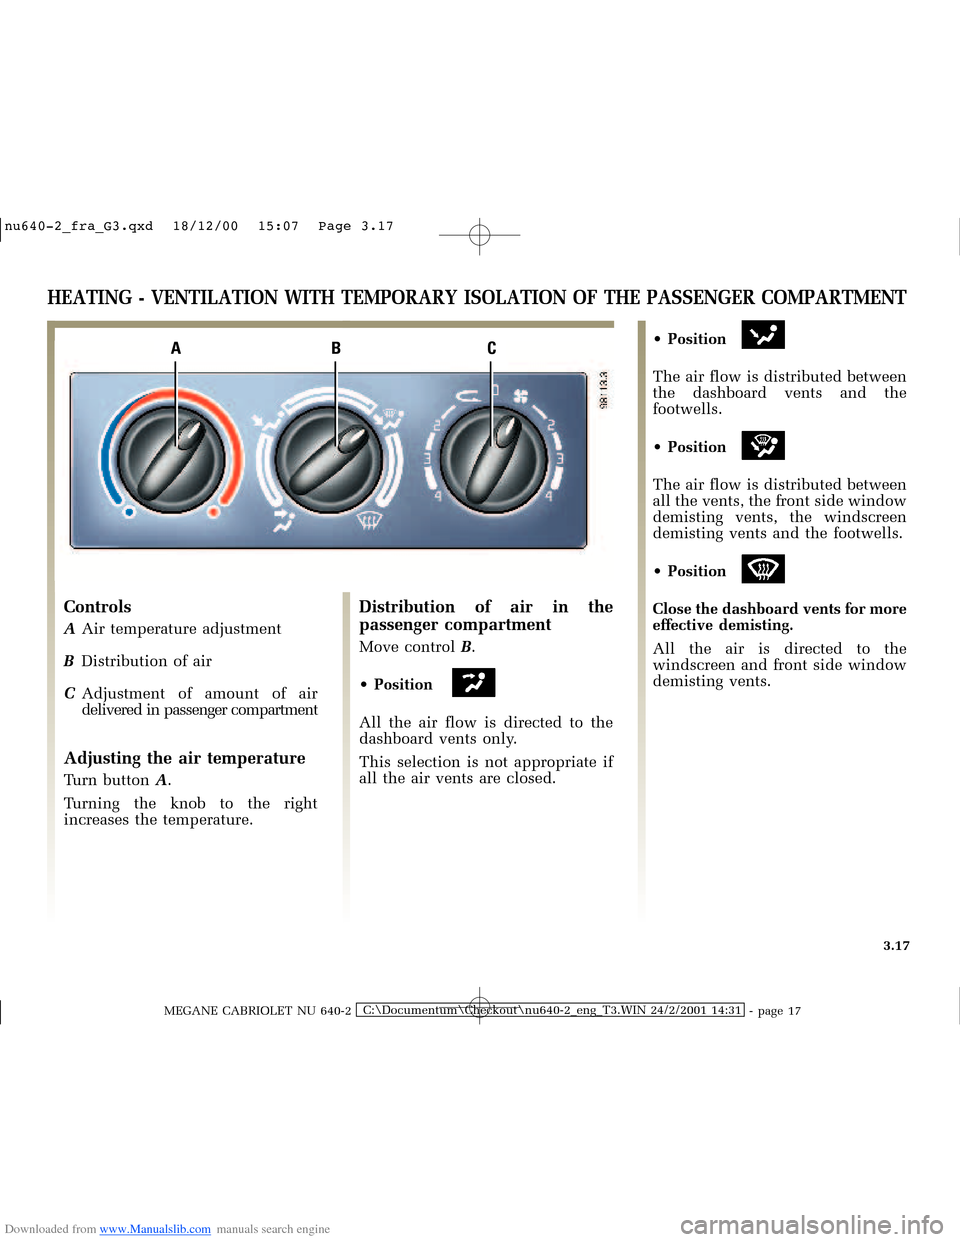 RENAULT MEGANE 2000 X64 / 1.G Owners Manual Downloaded from www.Manualslib.com manuals search engine ABC
�Q�X������B�I�U�D�B�*���T�[�G� � ��������� � ������ � �3�D�J�H� ����
MEGANE CABRIOLET NU 640-2C:\Documentum\